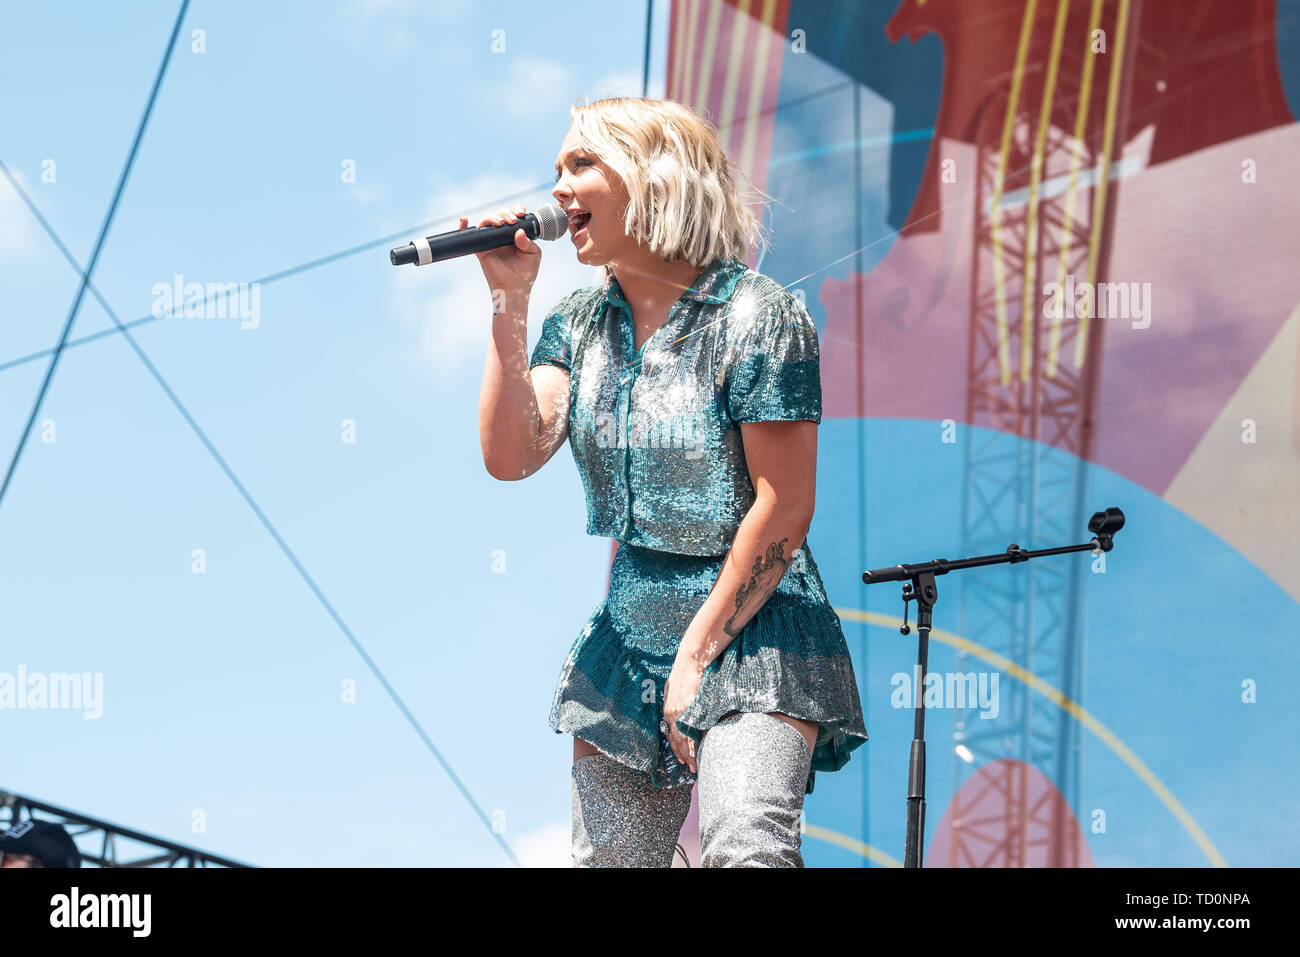 NASHVILLE, TENNESSEE - JUNE 09: RaeLynn performs on stage for day 4 of the 2019 CMA Music Festival on June 09, 2019 in Nashville, Tennessee. Photo: Andrew Wendowski for imageSPACE/MediaPunch Stock Photo